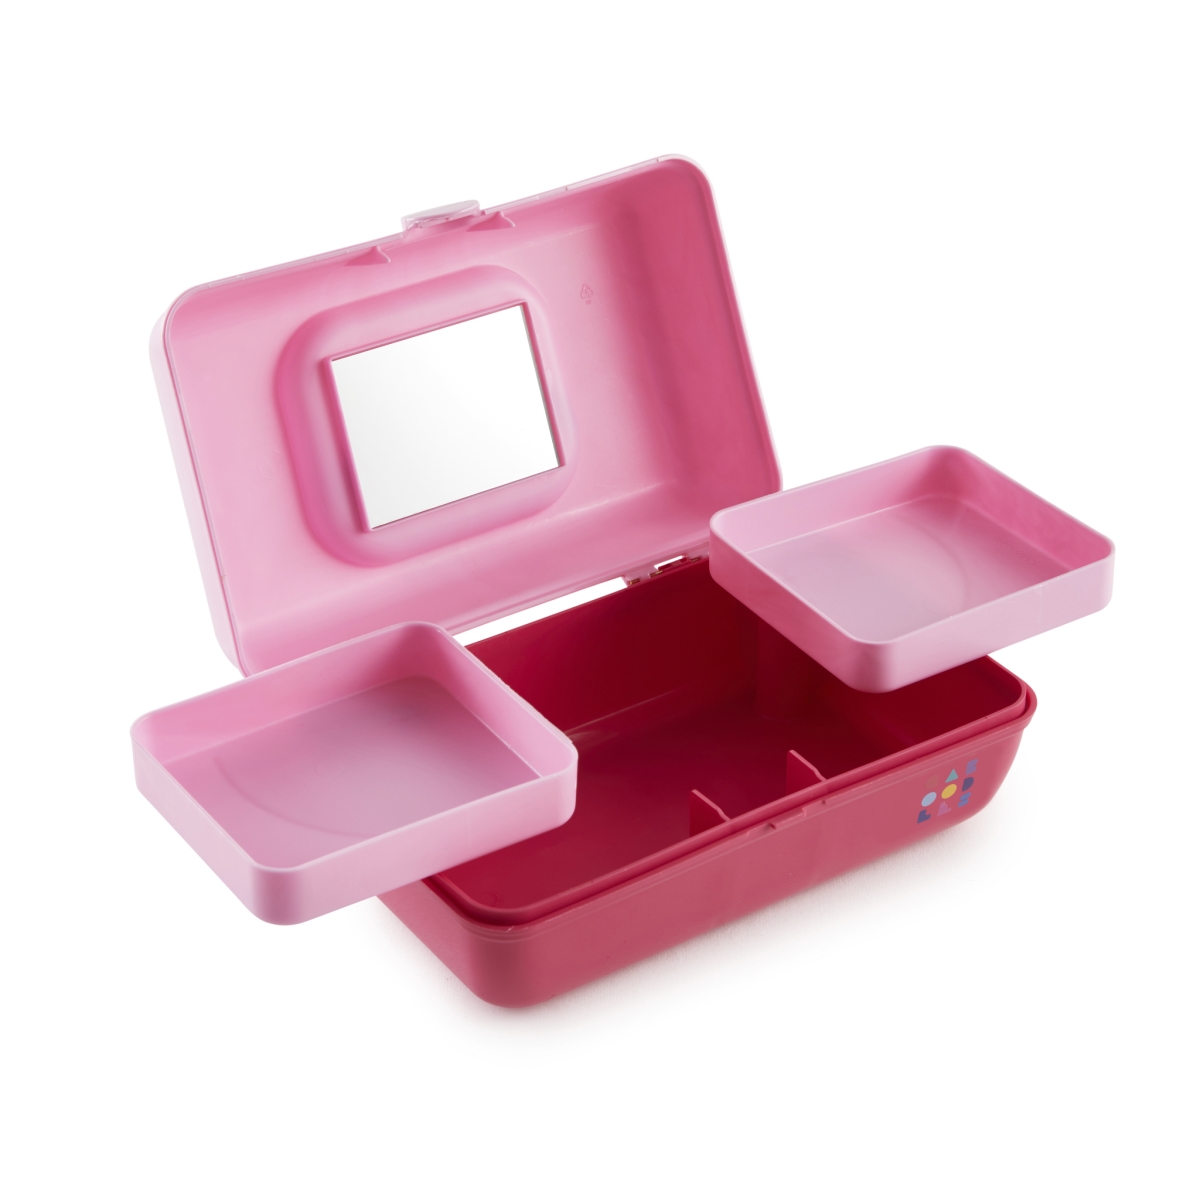 Cab53028a Pretty In Petite Cosmetic Case, Pink & Hot Pink